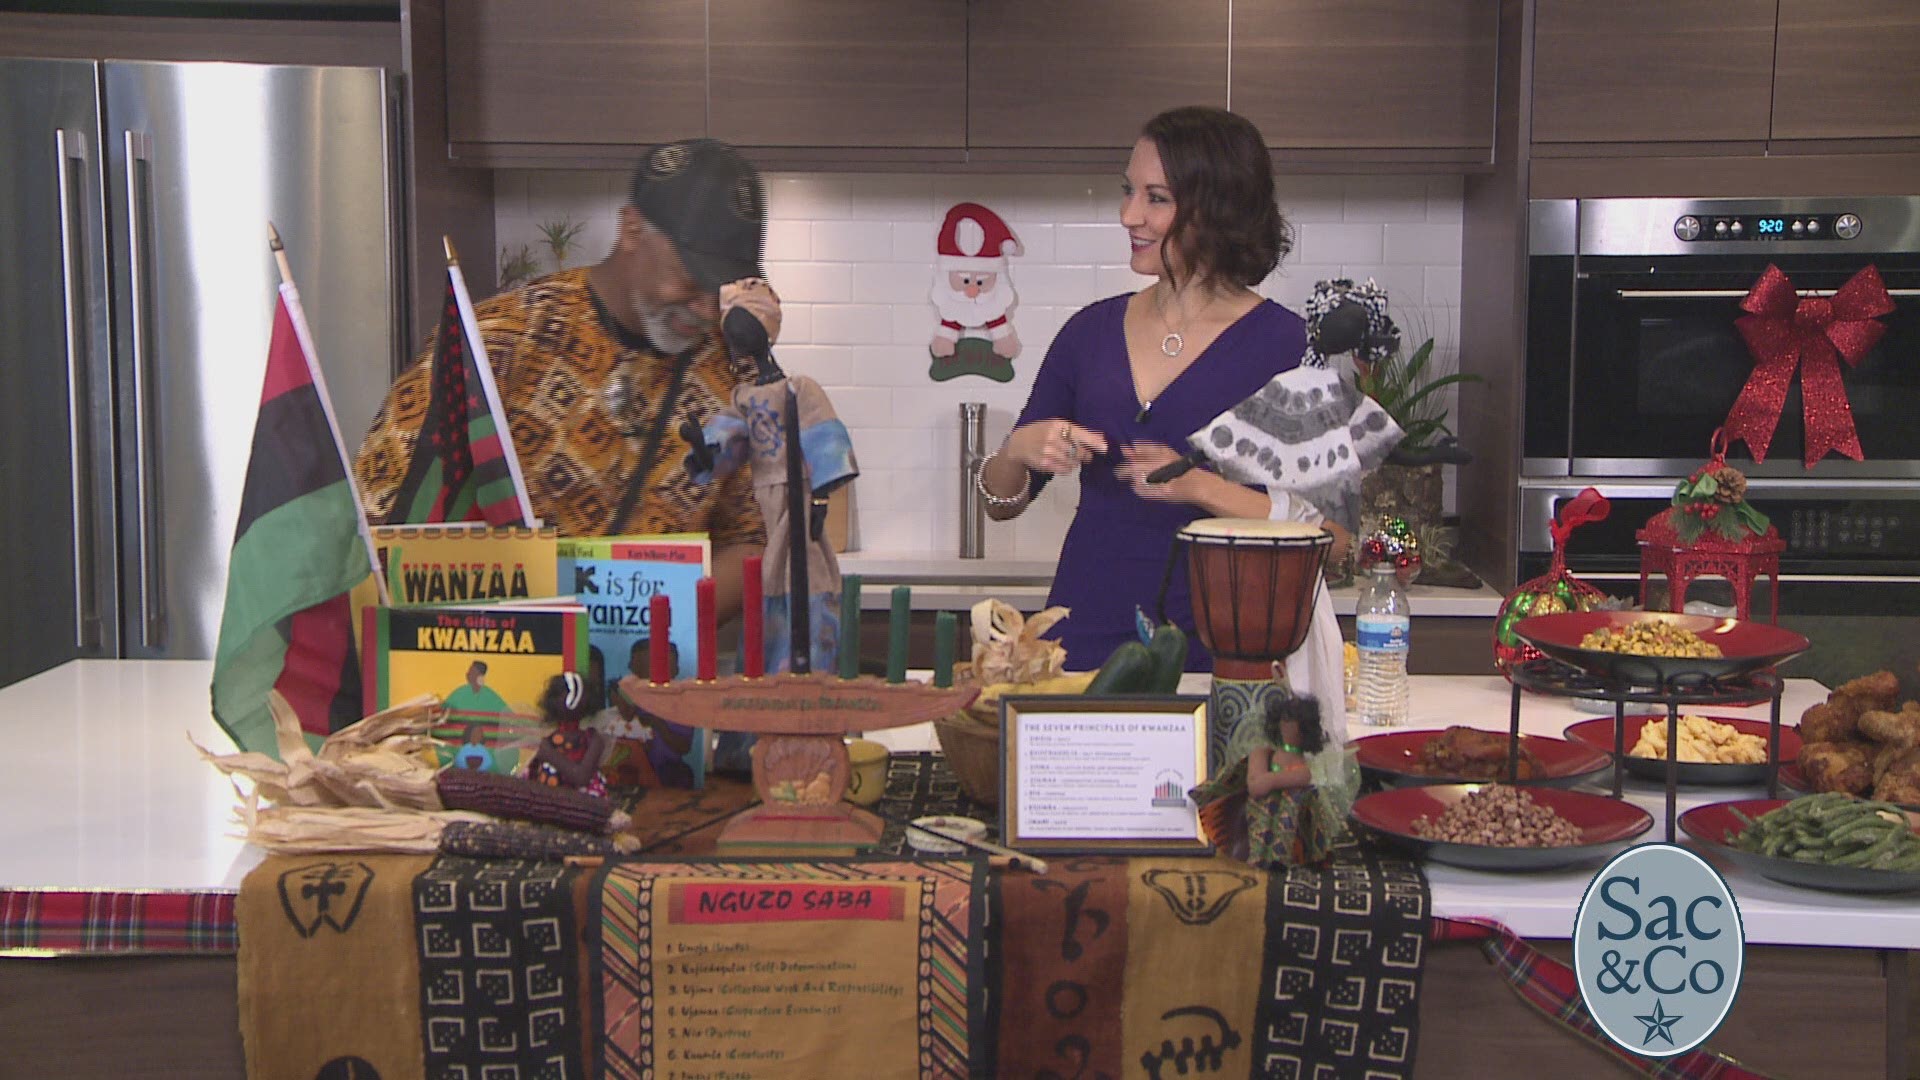 Chef Pannell tells us how food plays a part when celebrating Kwanzaa!